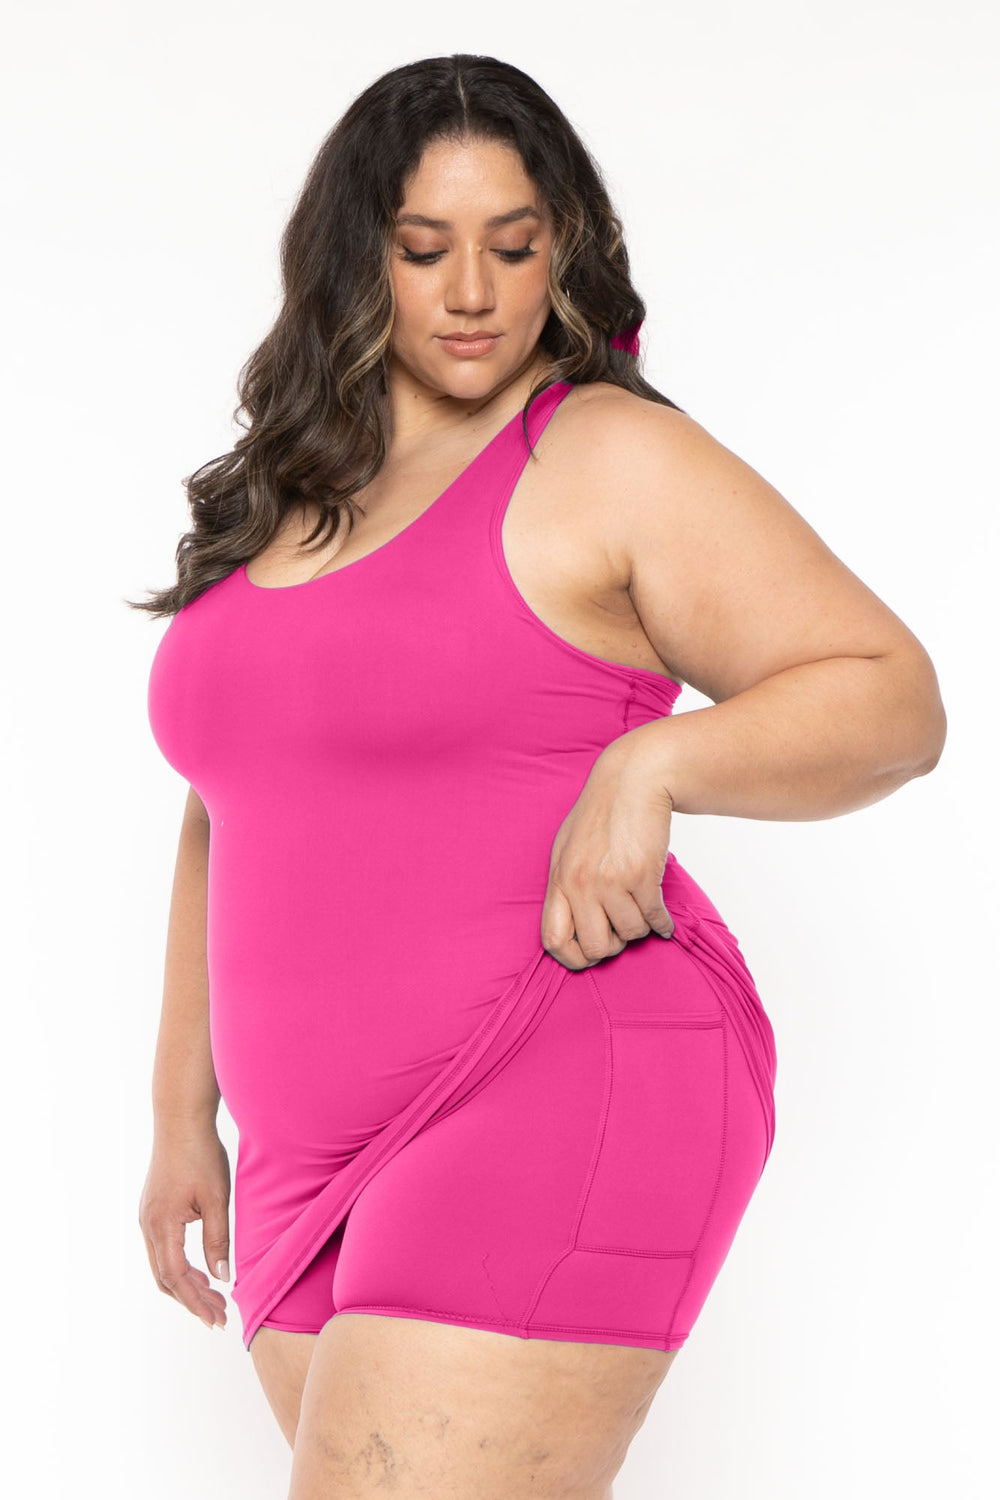 RAE MODE ACTIVEWEAR Plus Size Lizzy  Active Romper Dress  - Pink